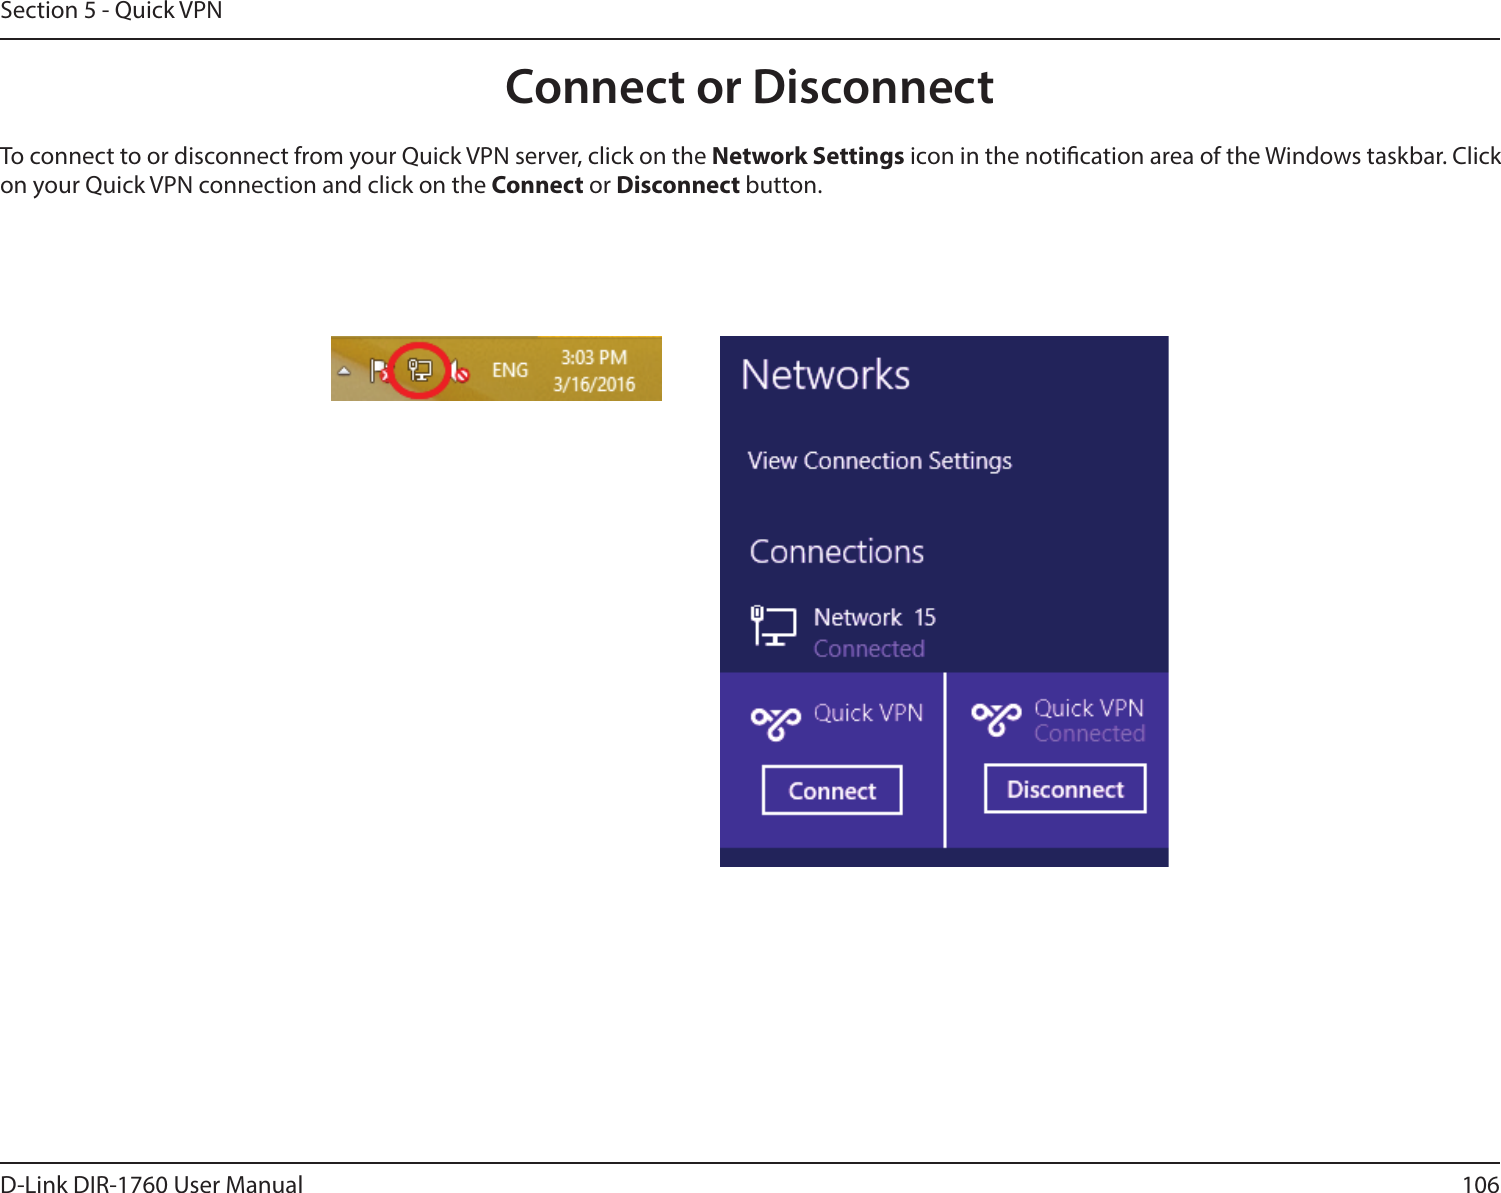 106D-Link DIR-1760 User ManualSection 5 - Quick VPNConnect or DisconnectTo connect to or disconnect from your Quick VPN server, click on the Network Settings icon in the notication area of the Windows taskbar. Click on your Quick VPN connection and click on the Connect or Disconnect button.